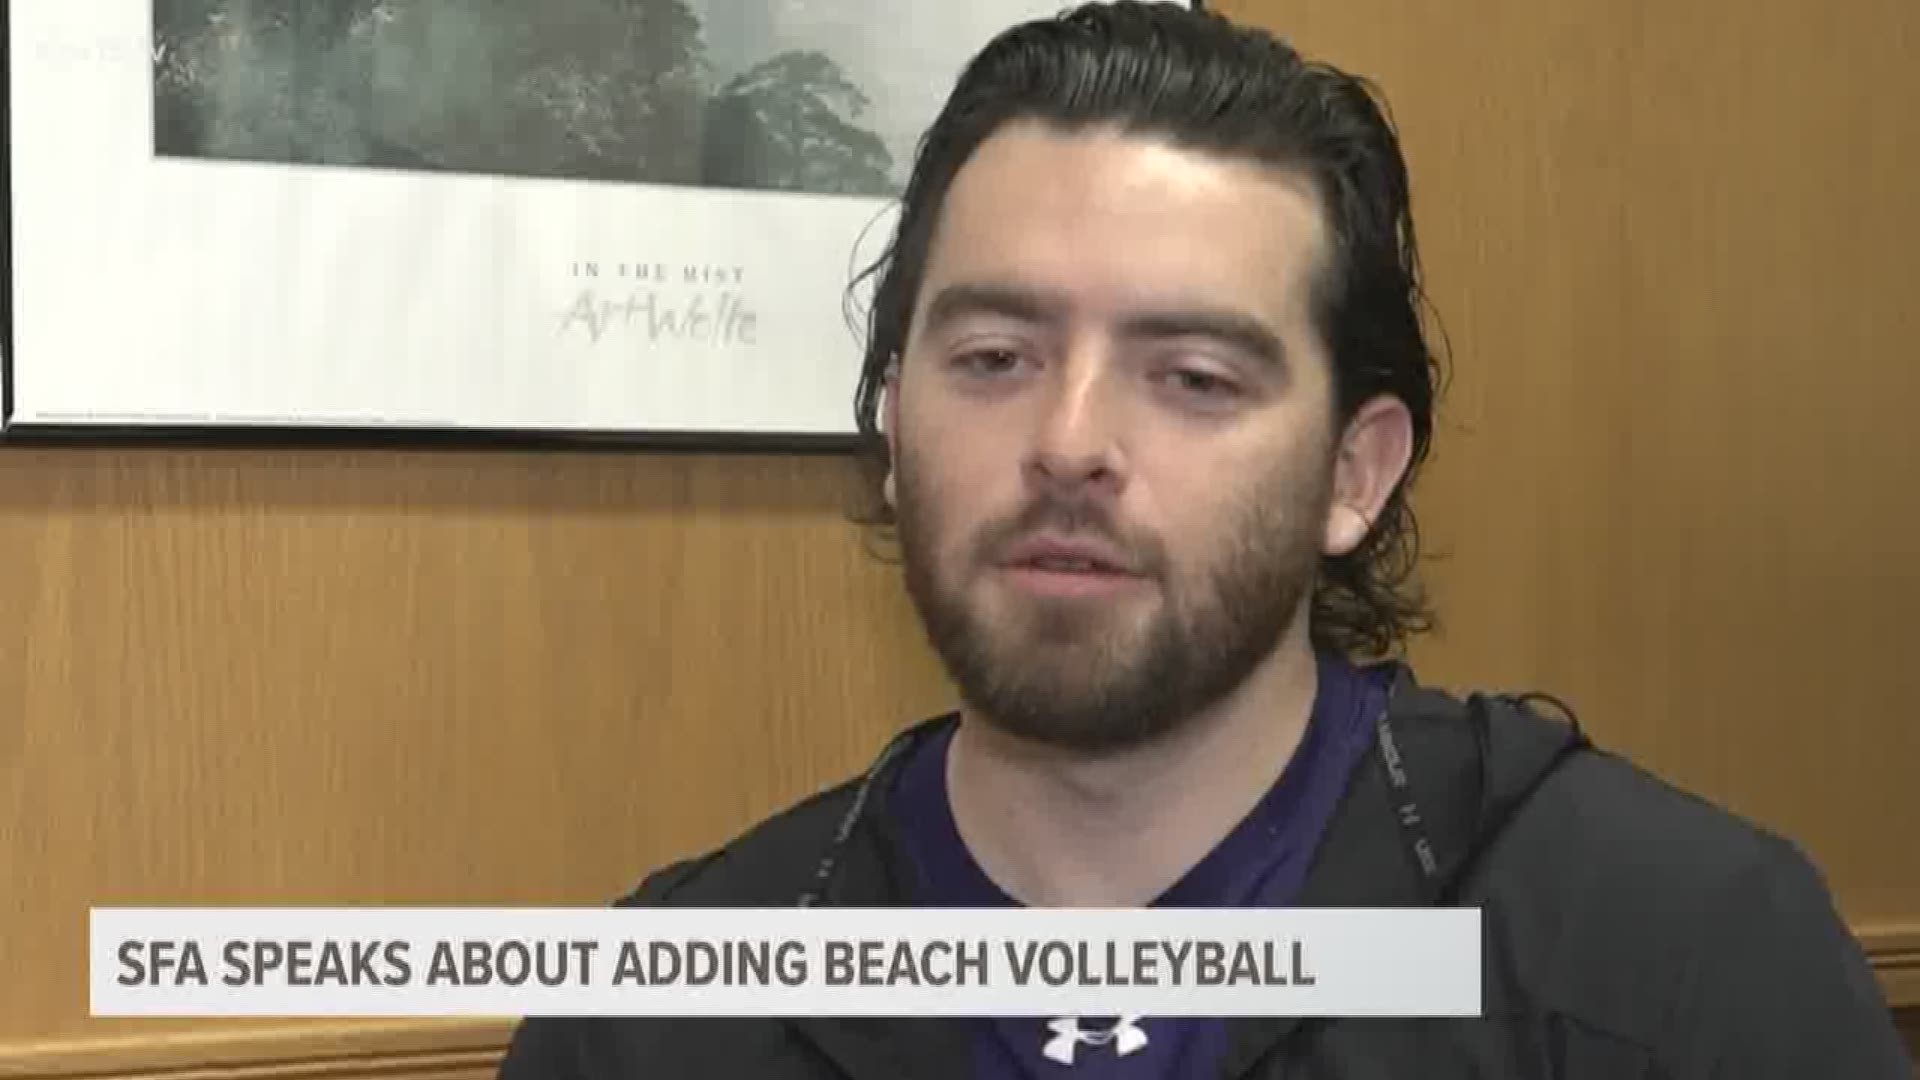 Alex Luna, the new beach volleyball coach at Stephen F. Austin State University talks the game and recruiting alongside Director of Volleyball Debbie Humphreys.